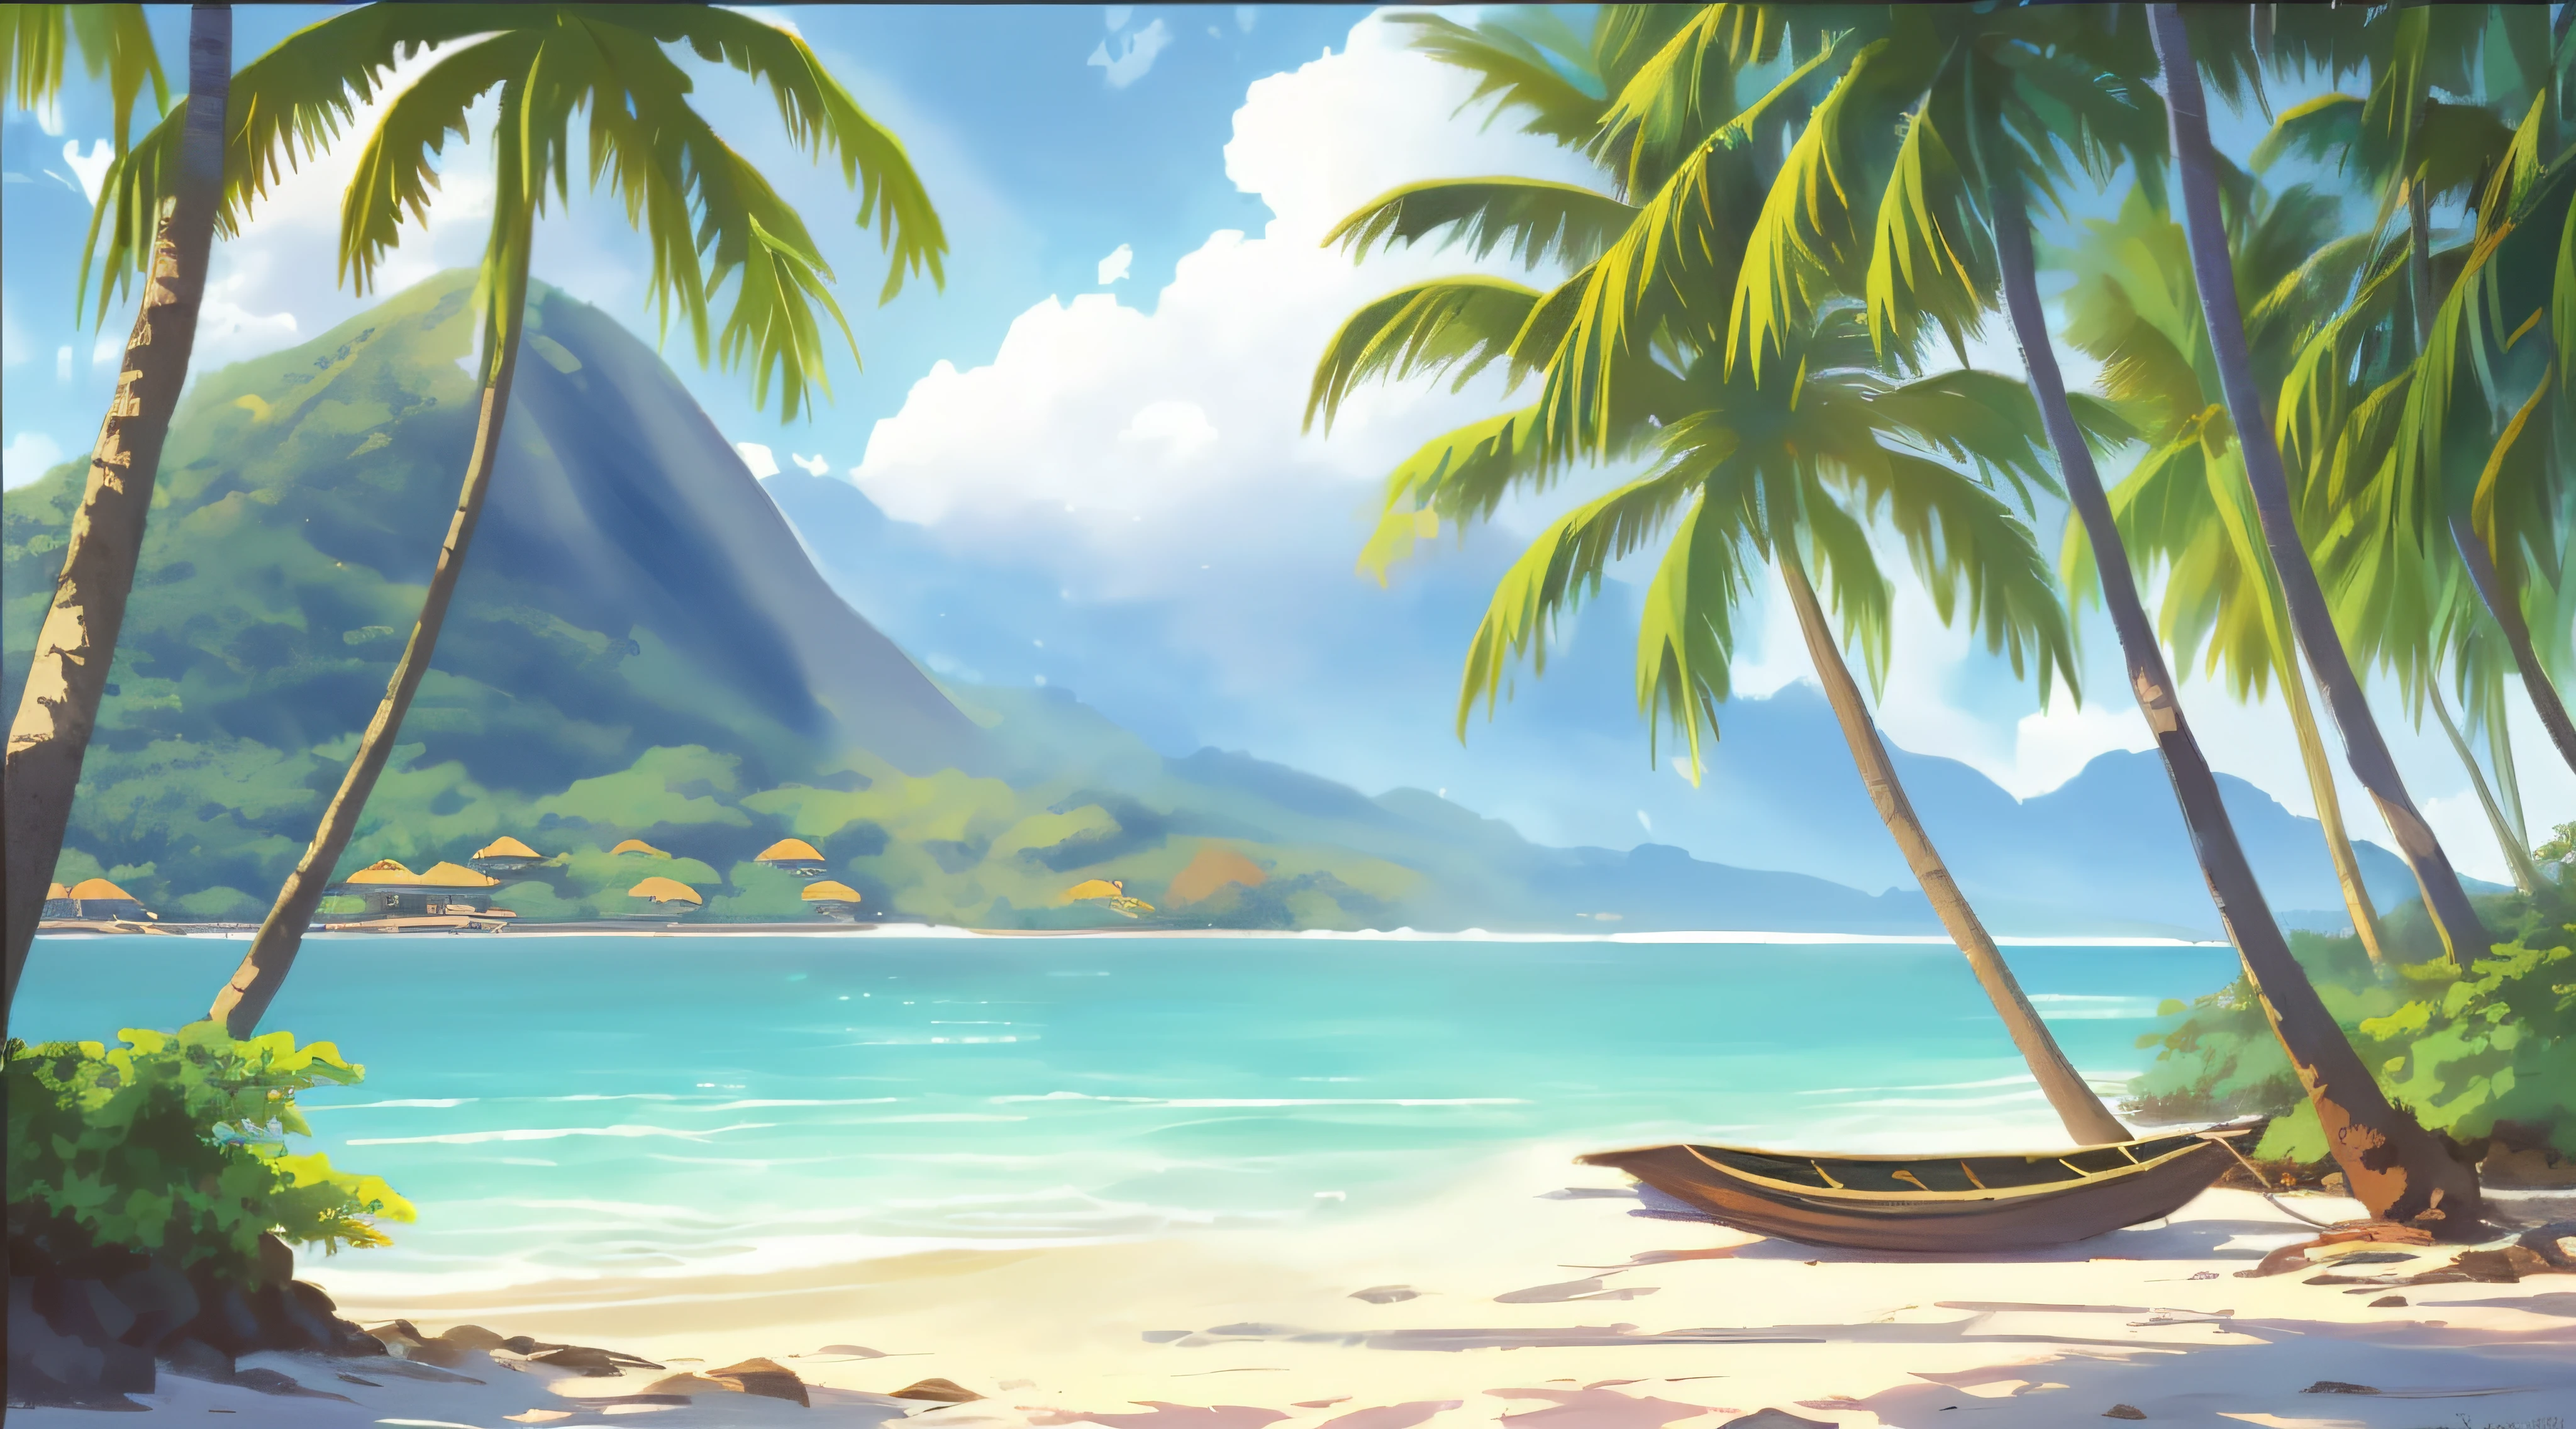 There is a canoe on the beach near the water and palm trees, island background, relaxing concept art, anime background art, beautiful wallpaper, paper awesome wallpaper, anime background, beach background, high quality desktop wallpaper, tropical beach paradise, tropical beach, fundo breezy, anime landscape wallpaper, beautiful background, pc wallpaper, painted in anime painter studio, 4 k hd illustrative wallpaper